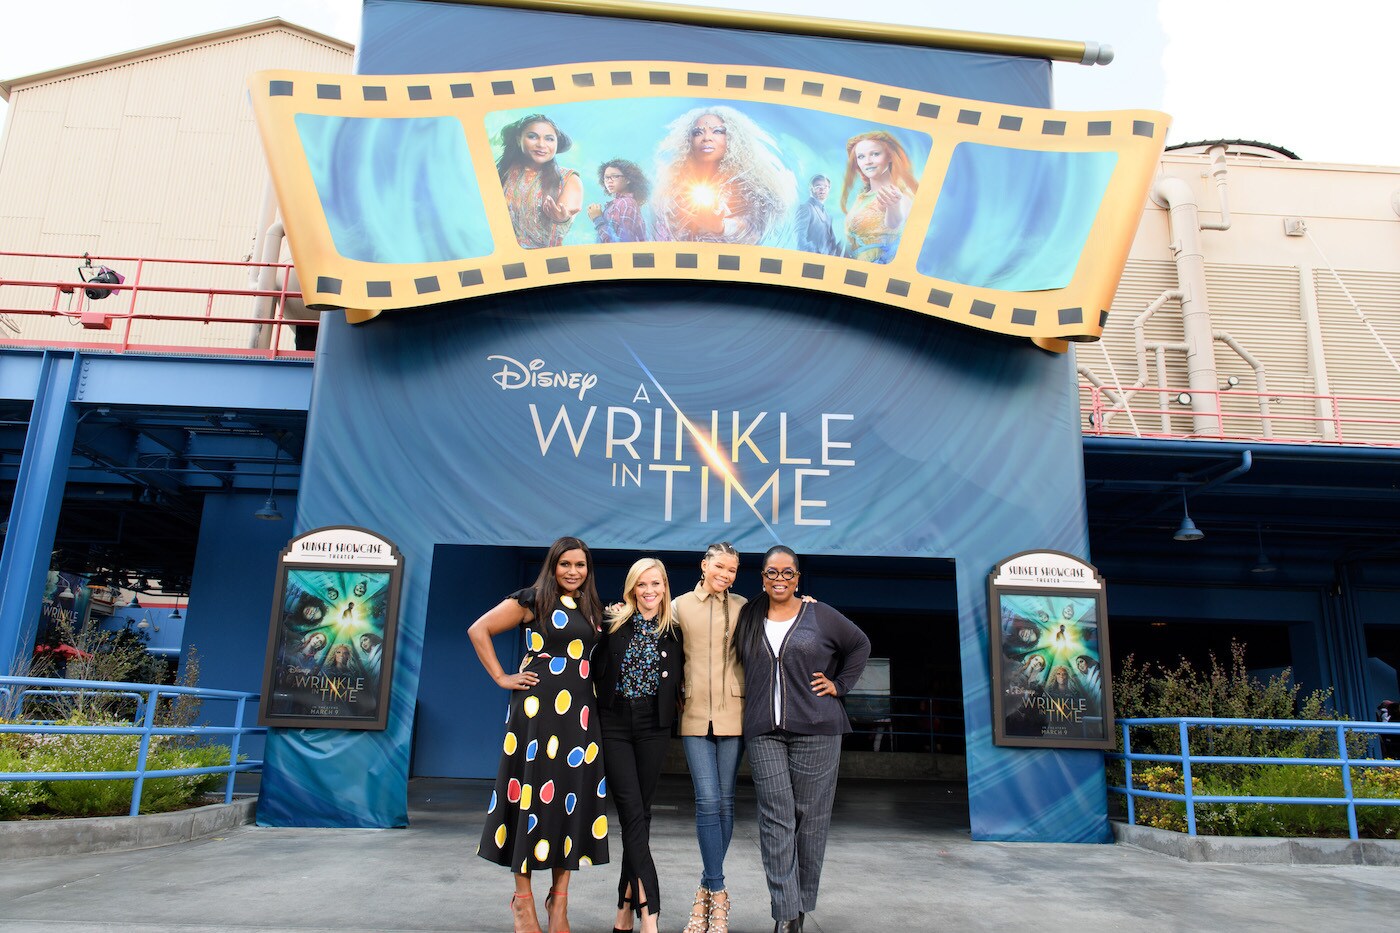 The Cast of A Wrinkle in Time at the Disneyland Resort